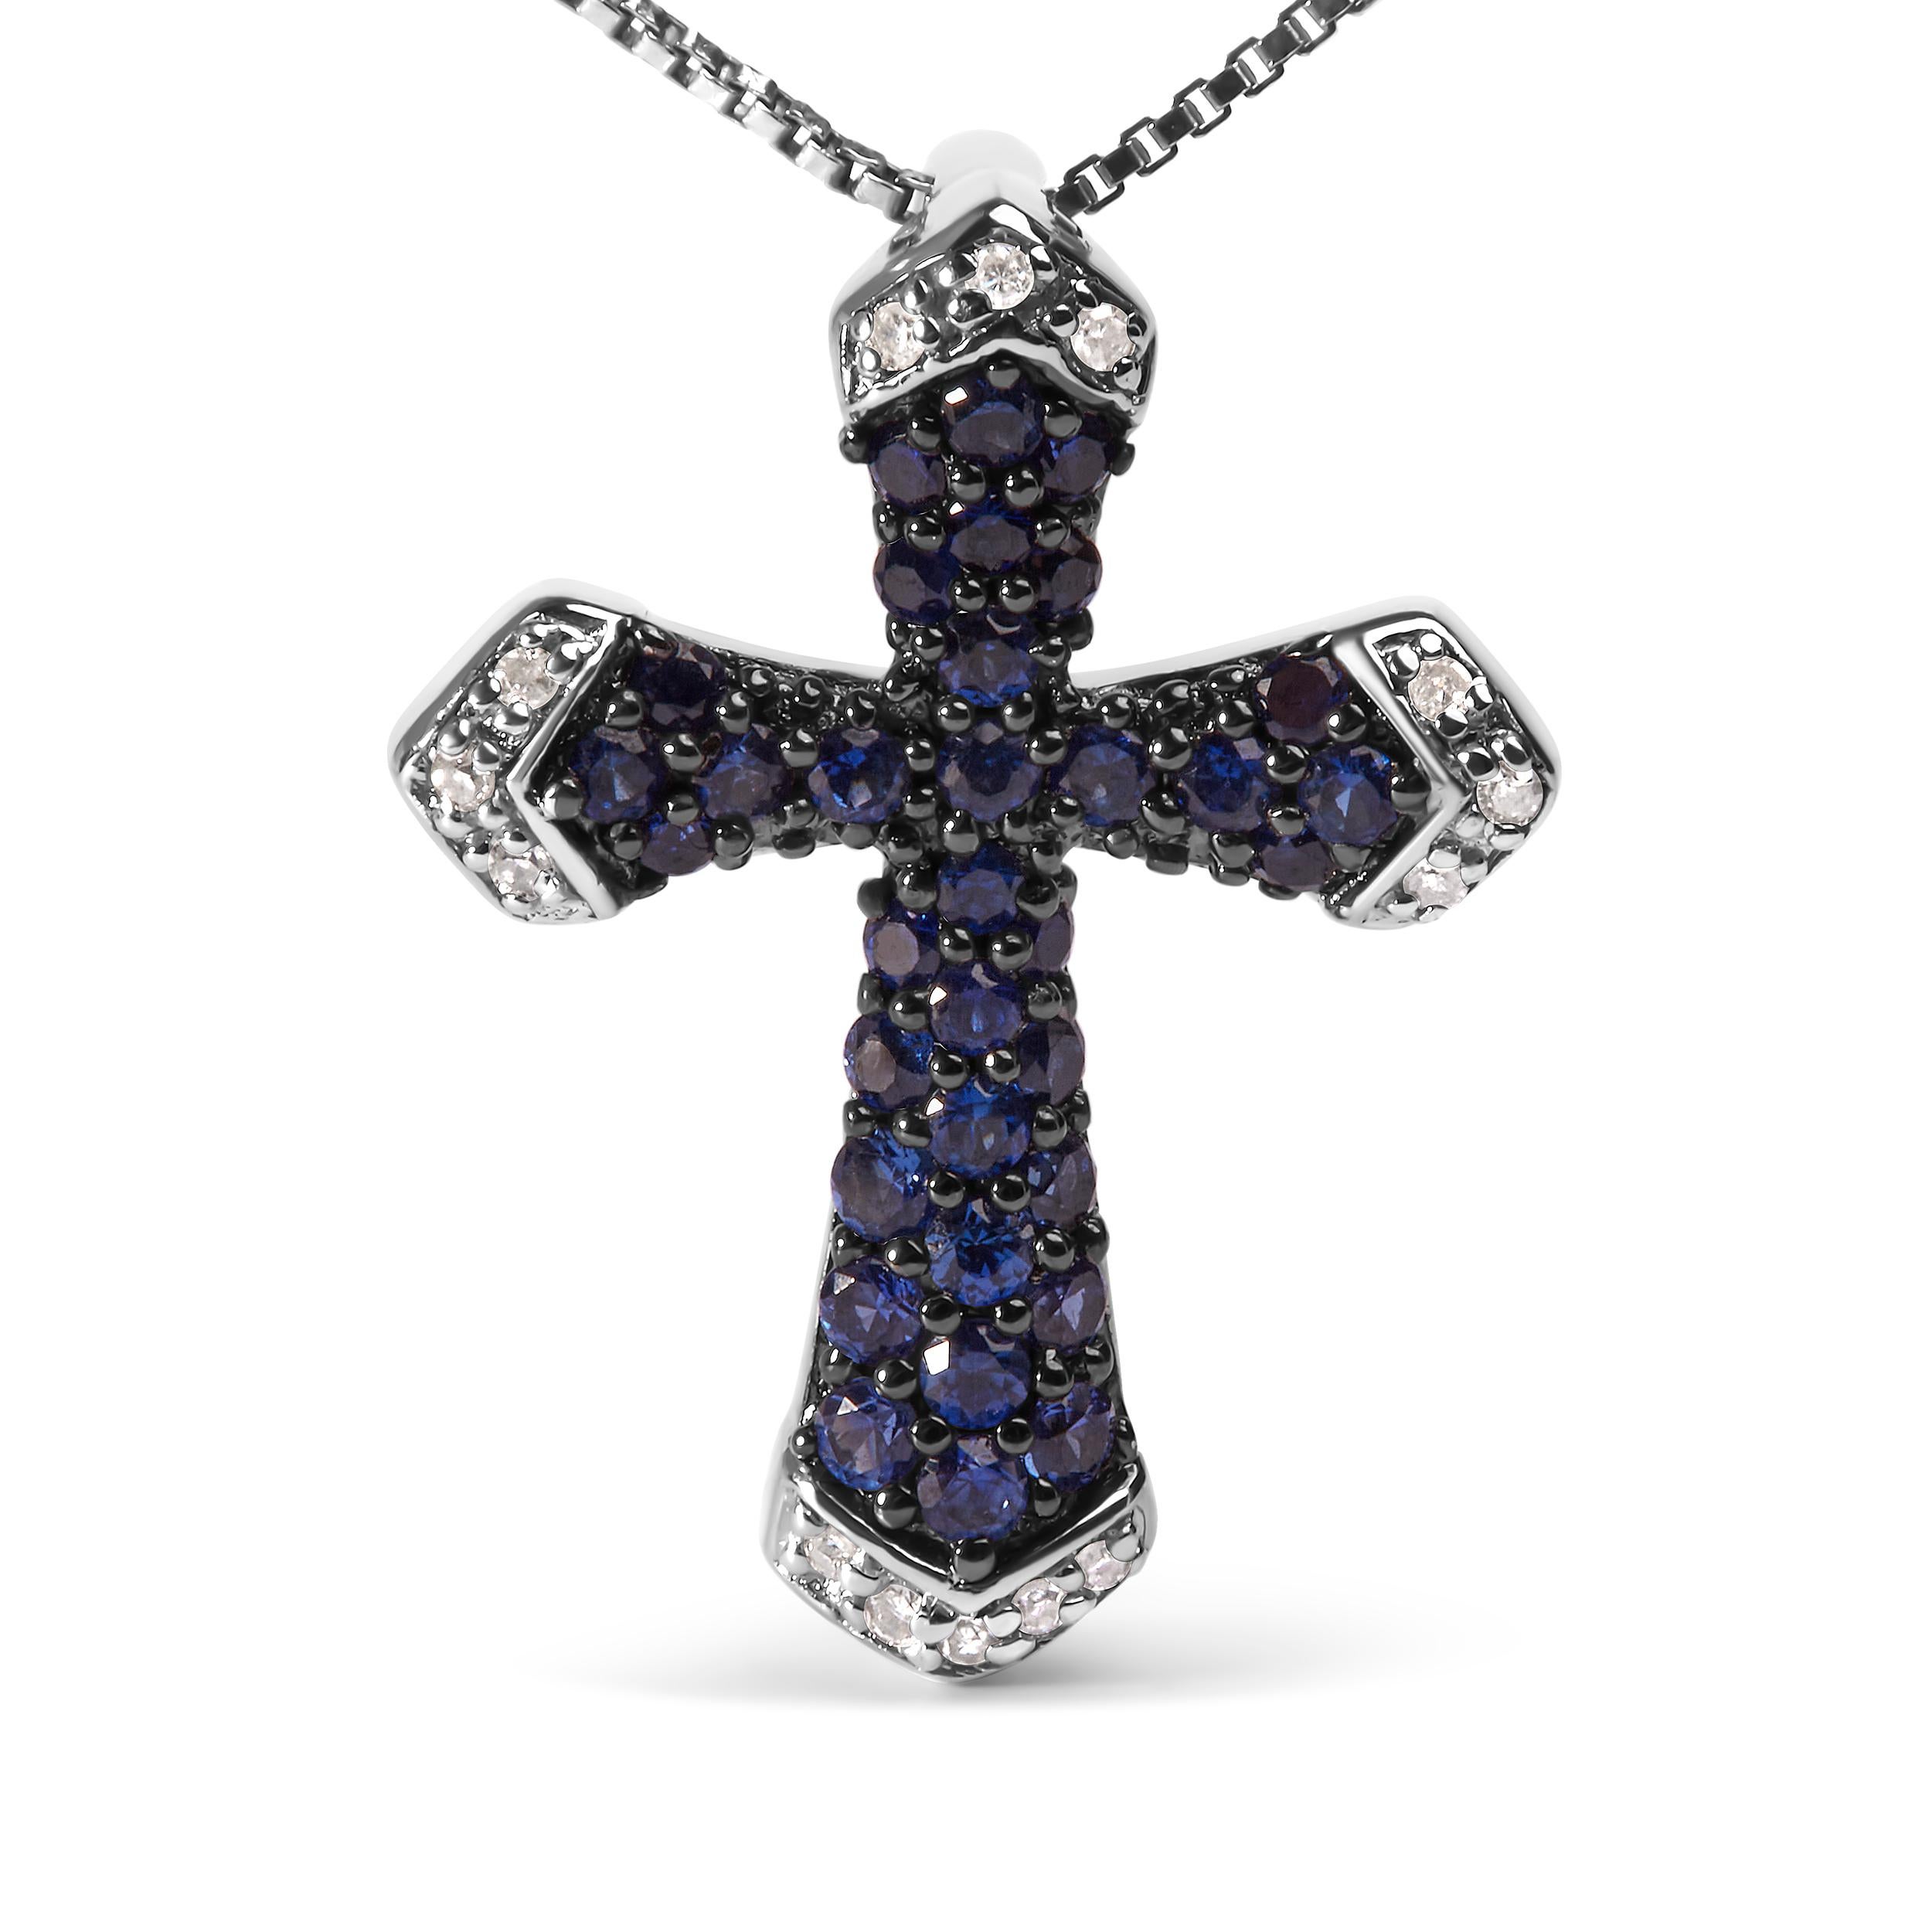 Introducing a divine masterpiece that exudes elegance and grace. This exquisite .925 Sterling Silver pendant necklace is adorned with a mesmerizing 3/4 Cttw Created Blue Sapphire gemstone, radiating a heavenly blue hue. The round gemstone,